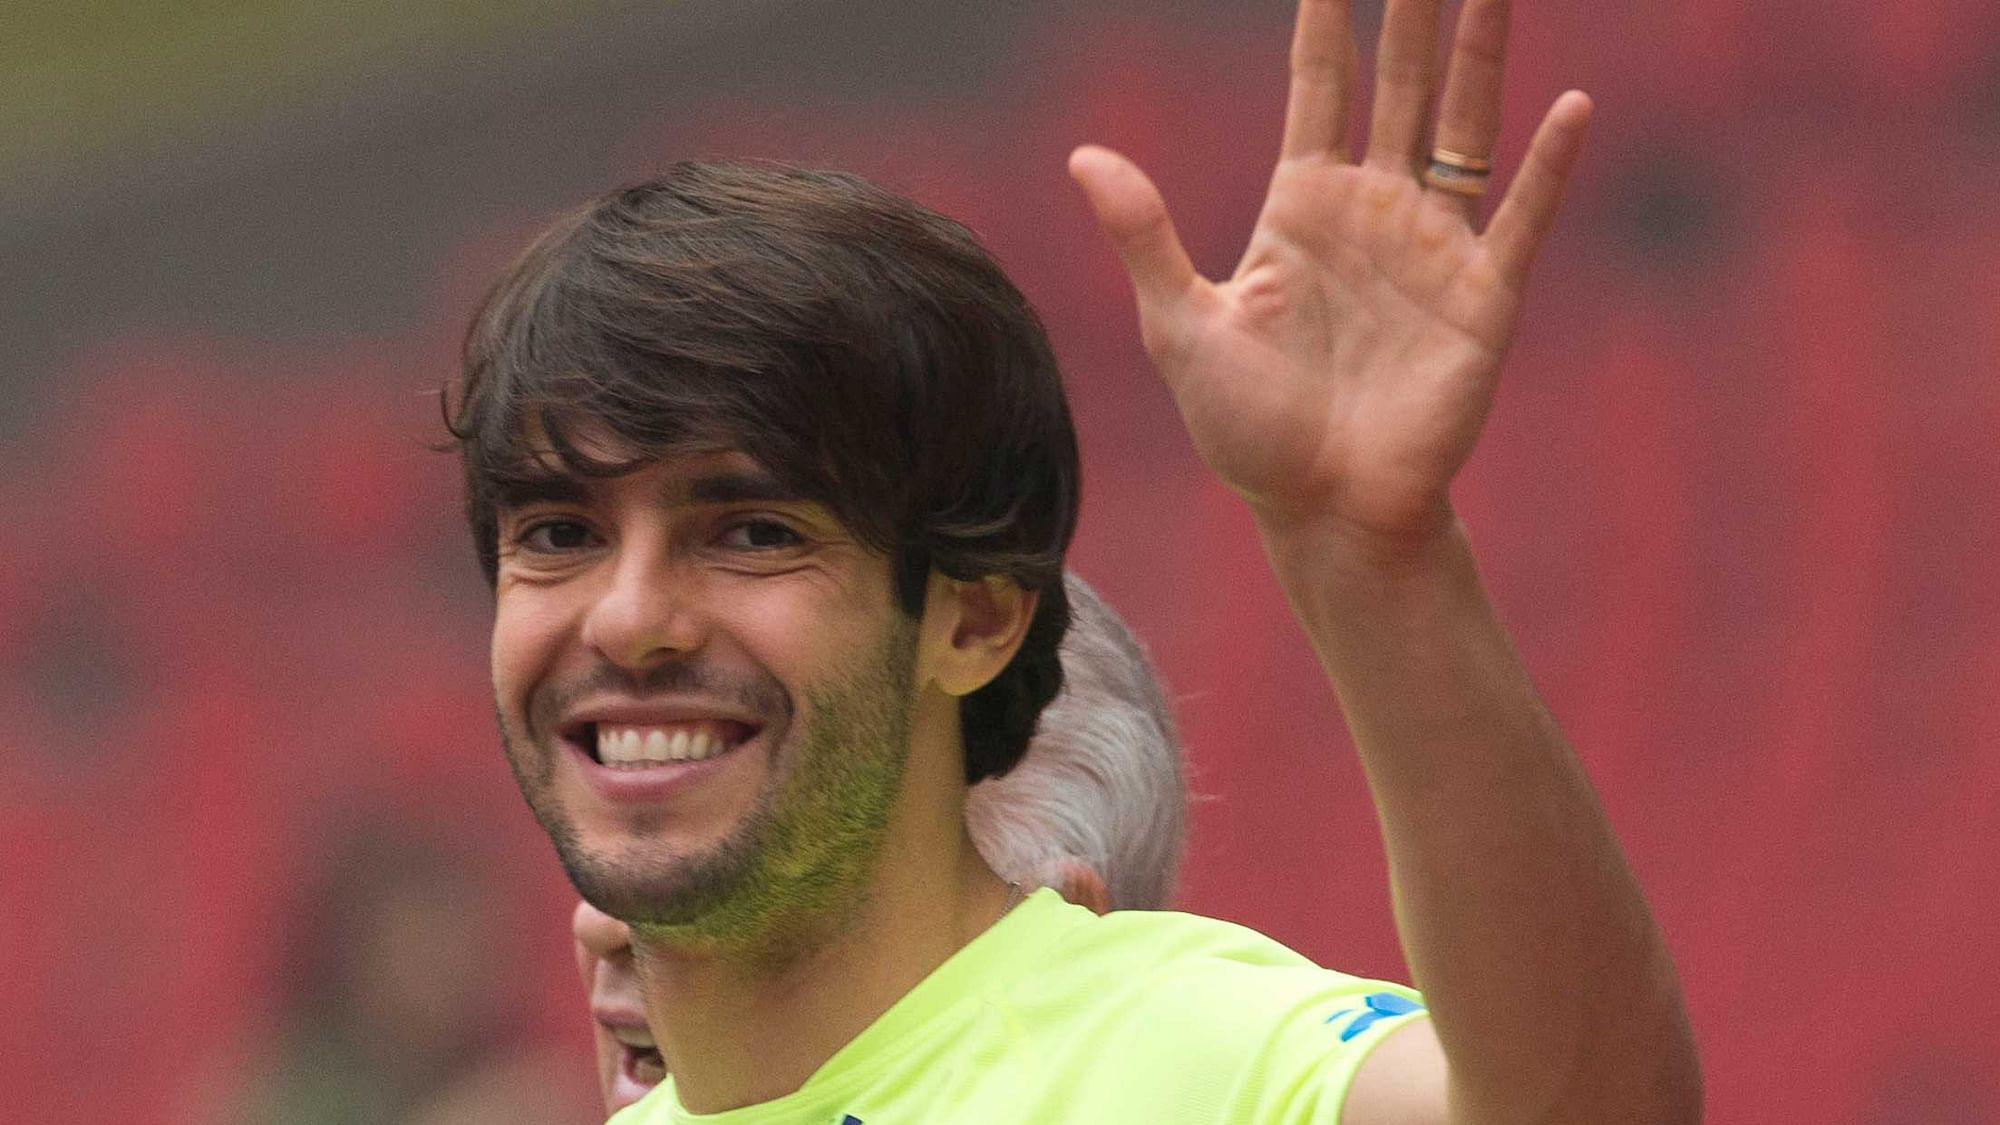 Brazil’s Kaka waves as he arrives for a training session ahead of a friendly match against Argentina at the Bird’s Nest National Stadium in Beijing, China. Former Ballon d’Or winner Kaka says he is retiring from soccer at age 35.<a></a>